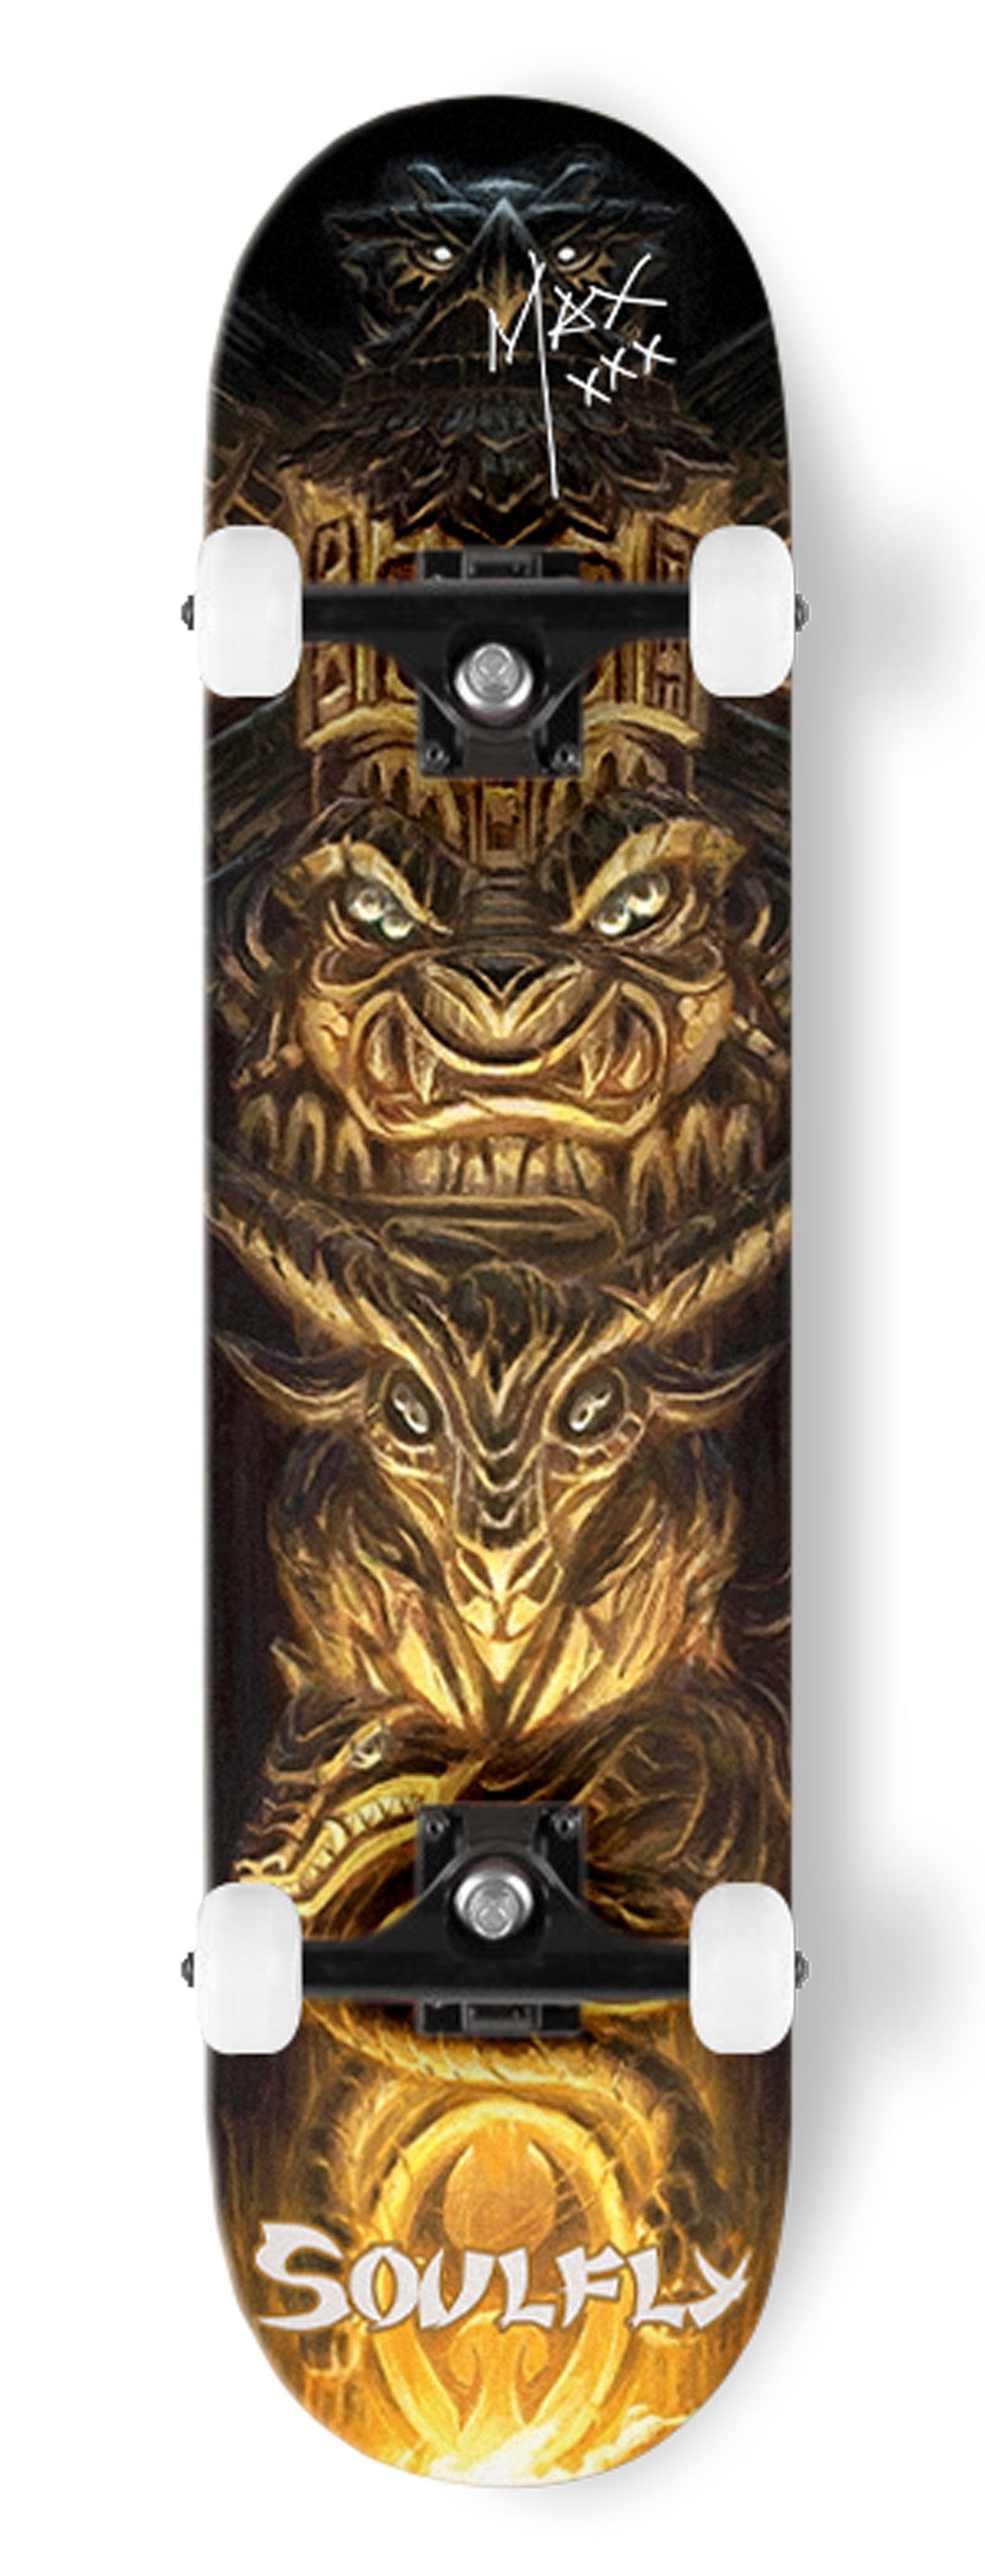 Soulfly Skateboard Deck (Signed by Max Cavalera)